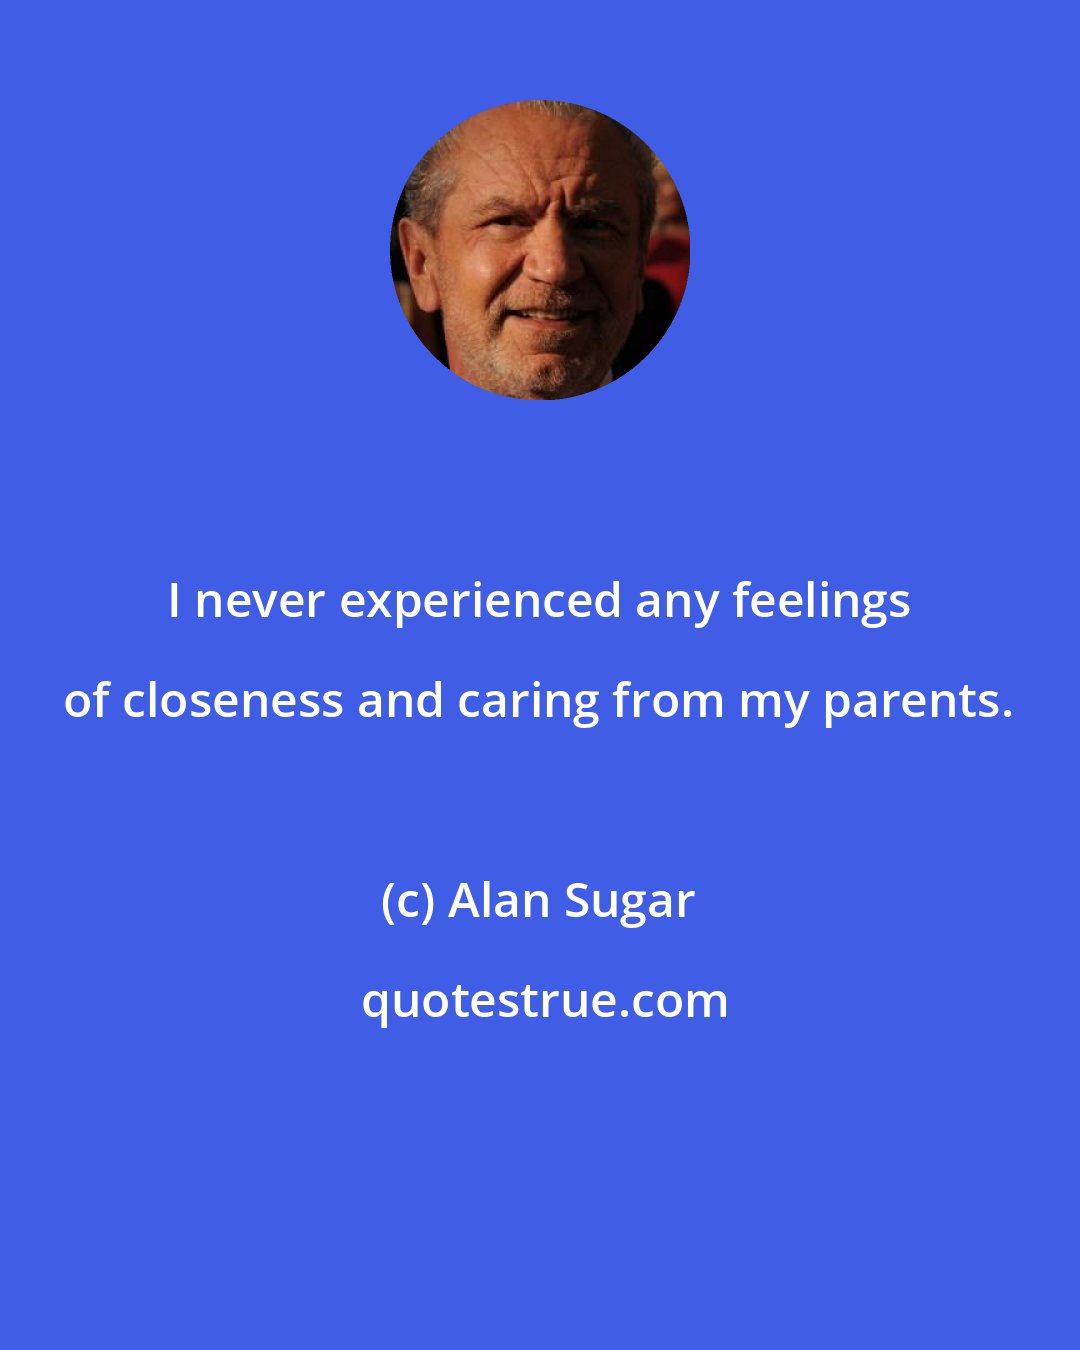 Alan Sugar: I never experienced any feelings of closeness and caring from my parents.